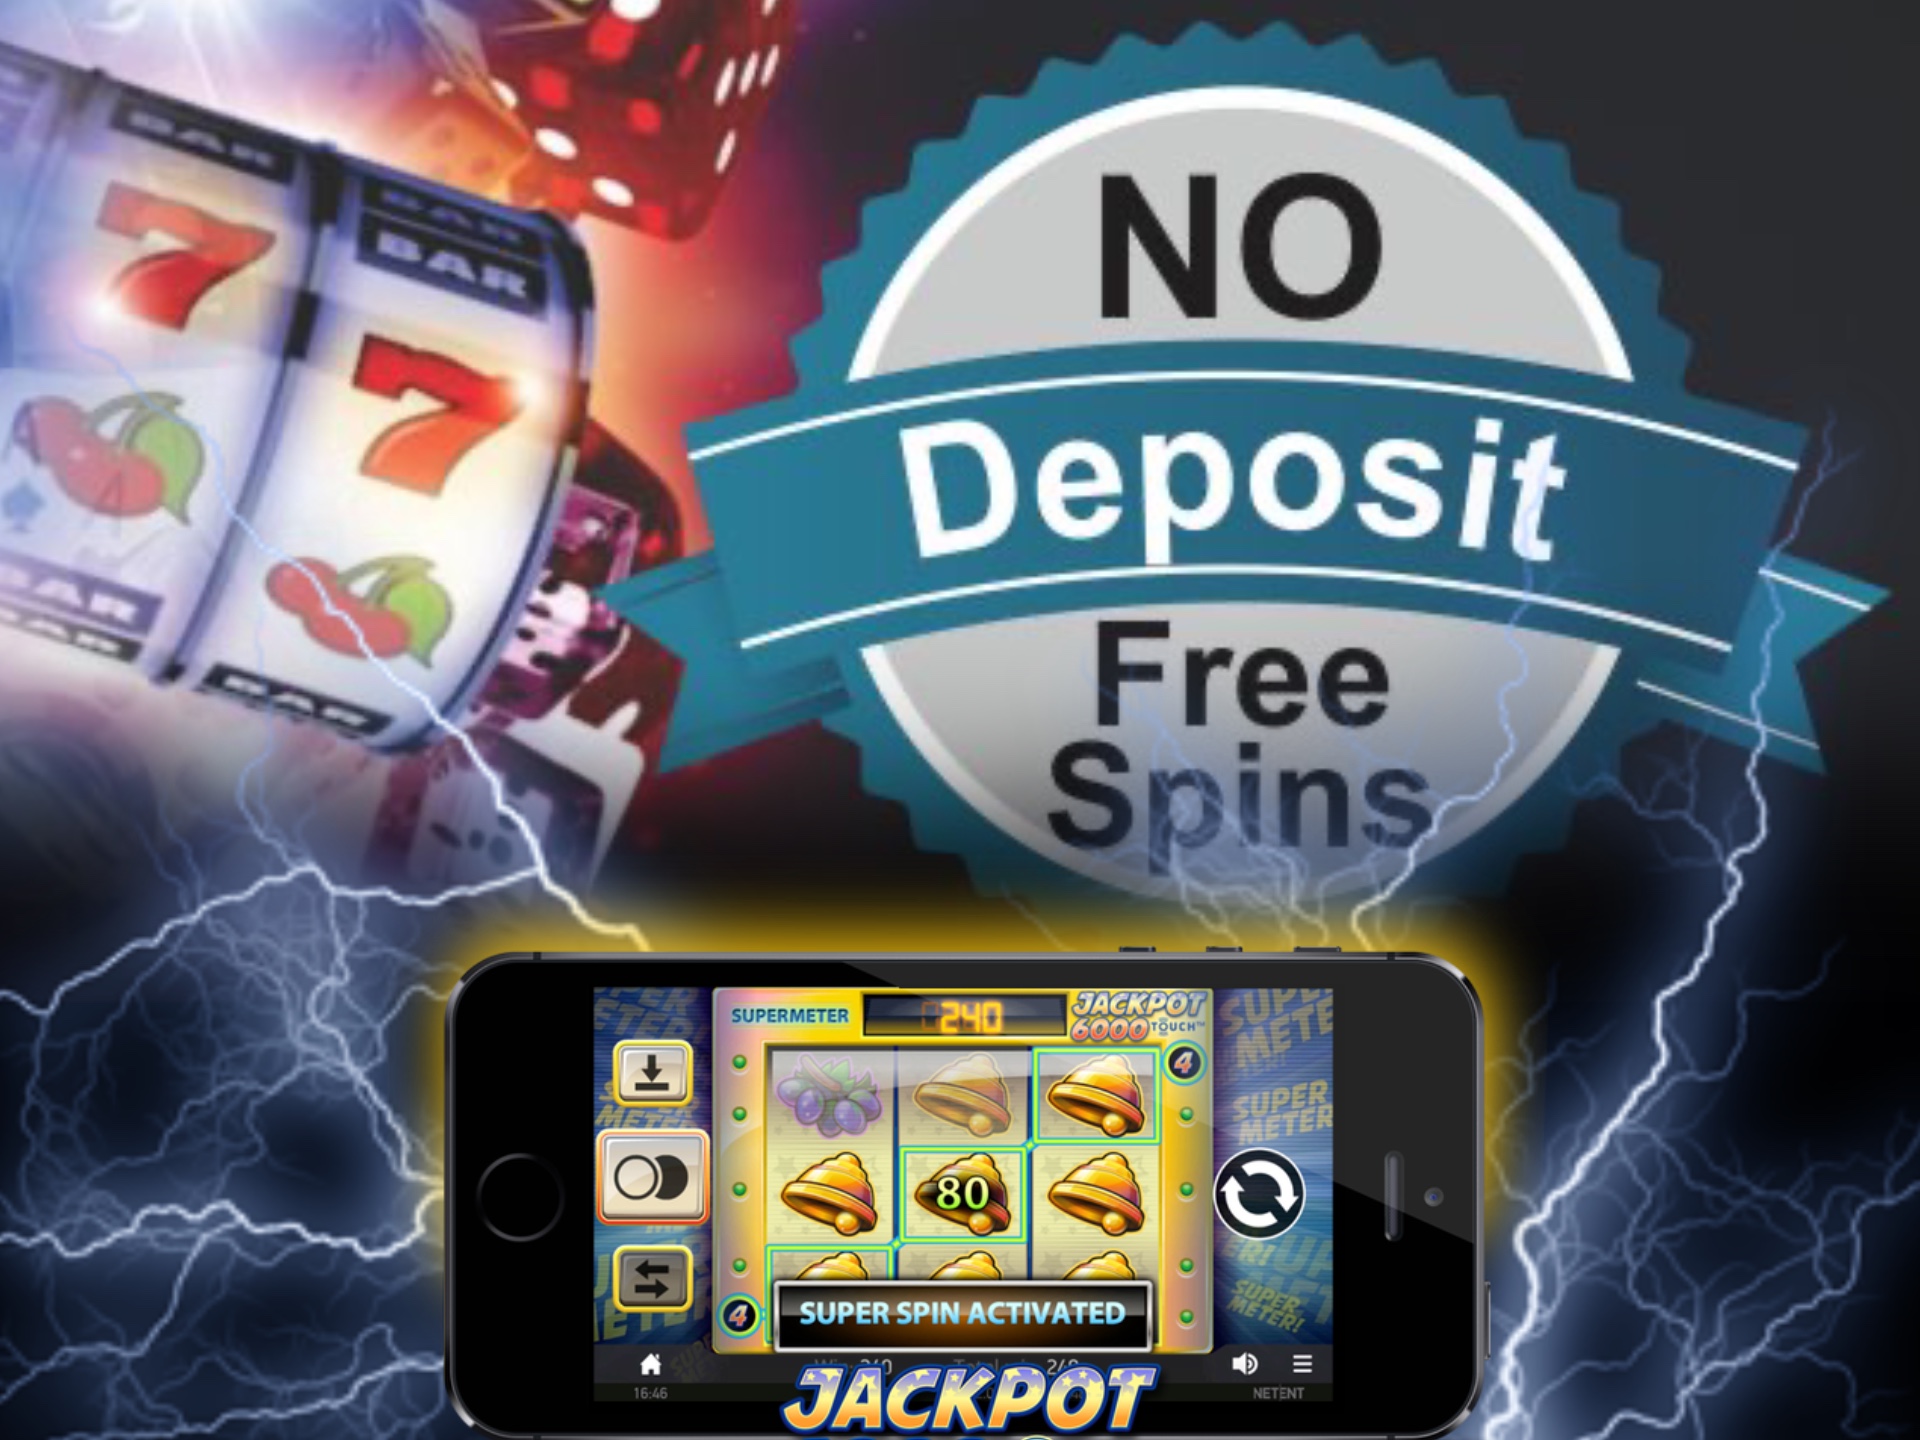 You can use this bonus if you register at an online casino mobile app.